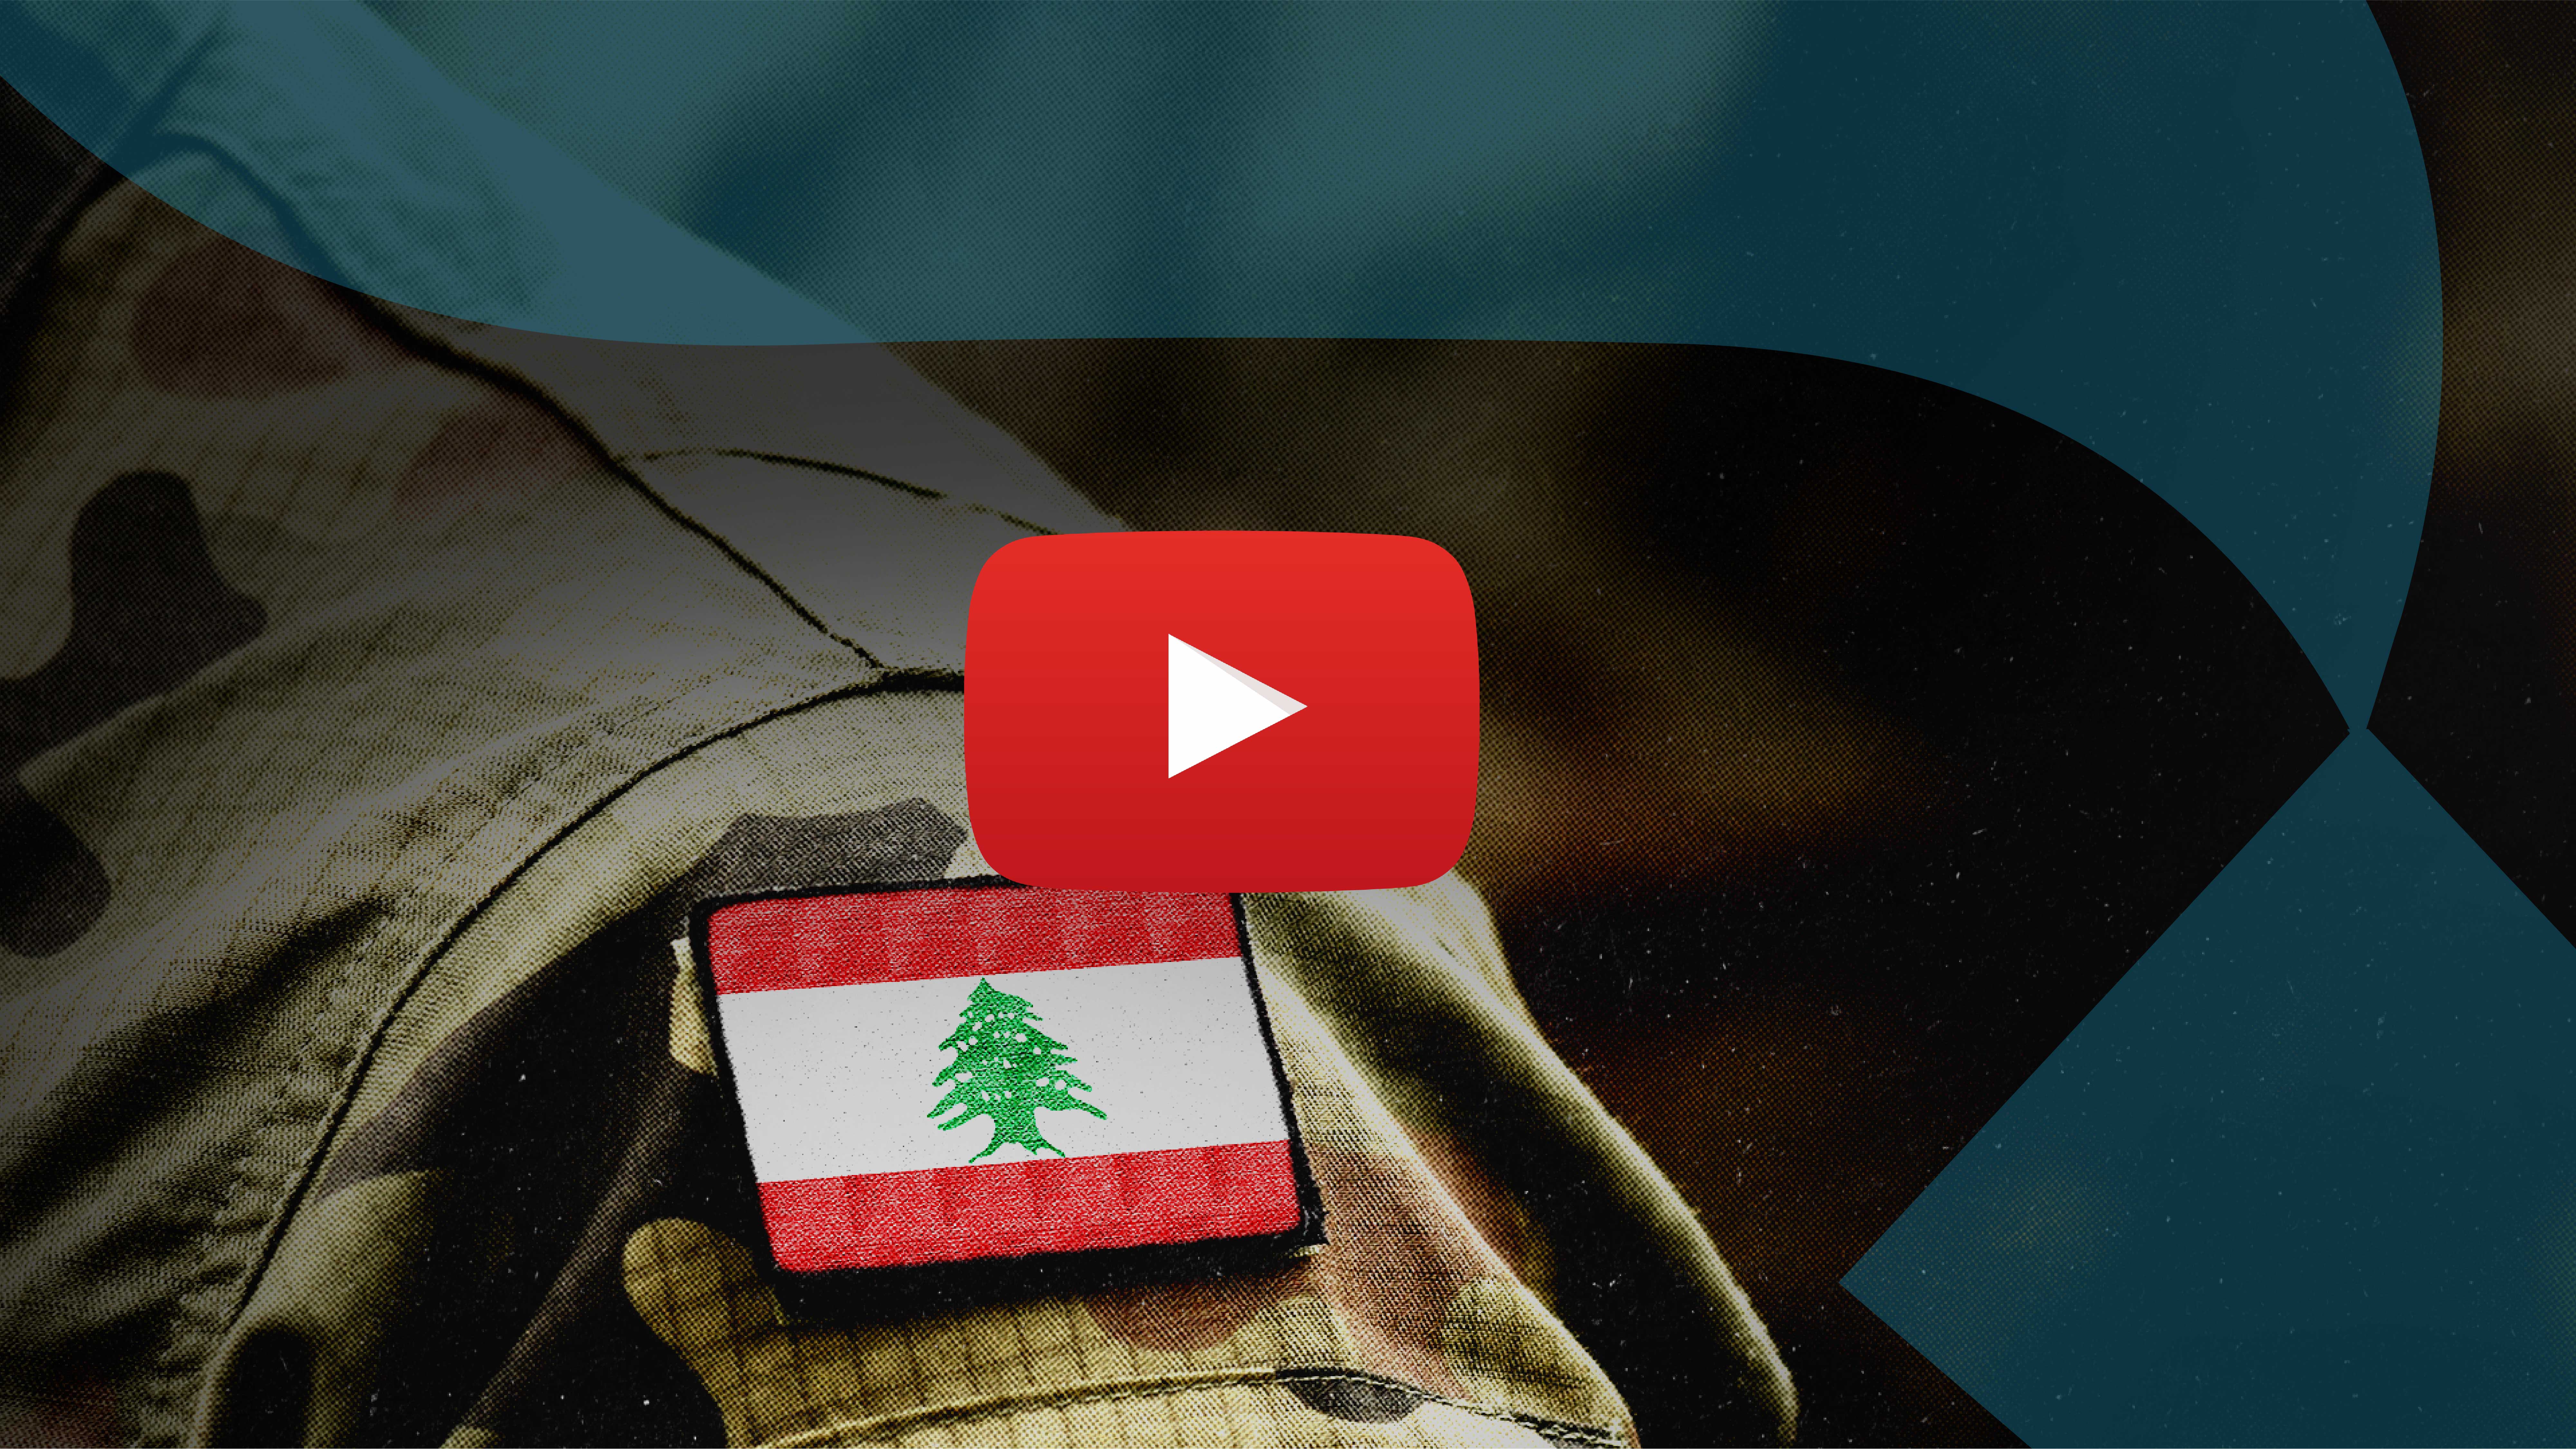 Unified Defense: Reforming the Lebanese Army Is the Only Way to Address Military Dualism